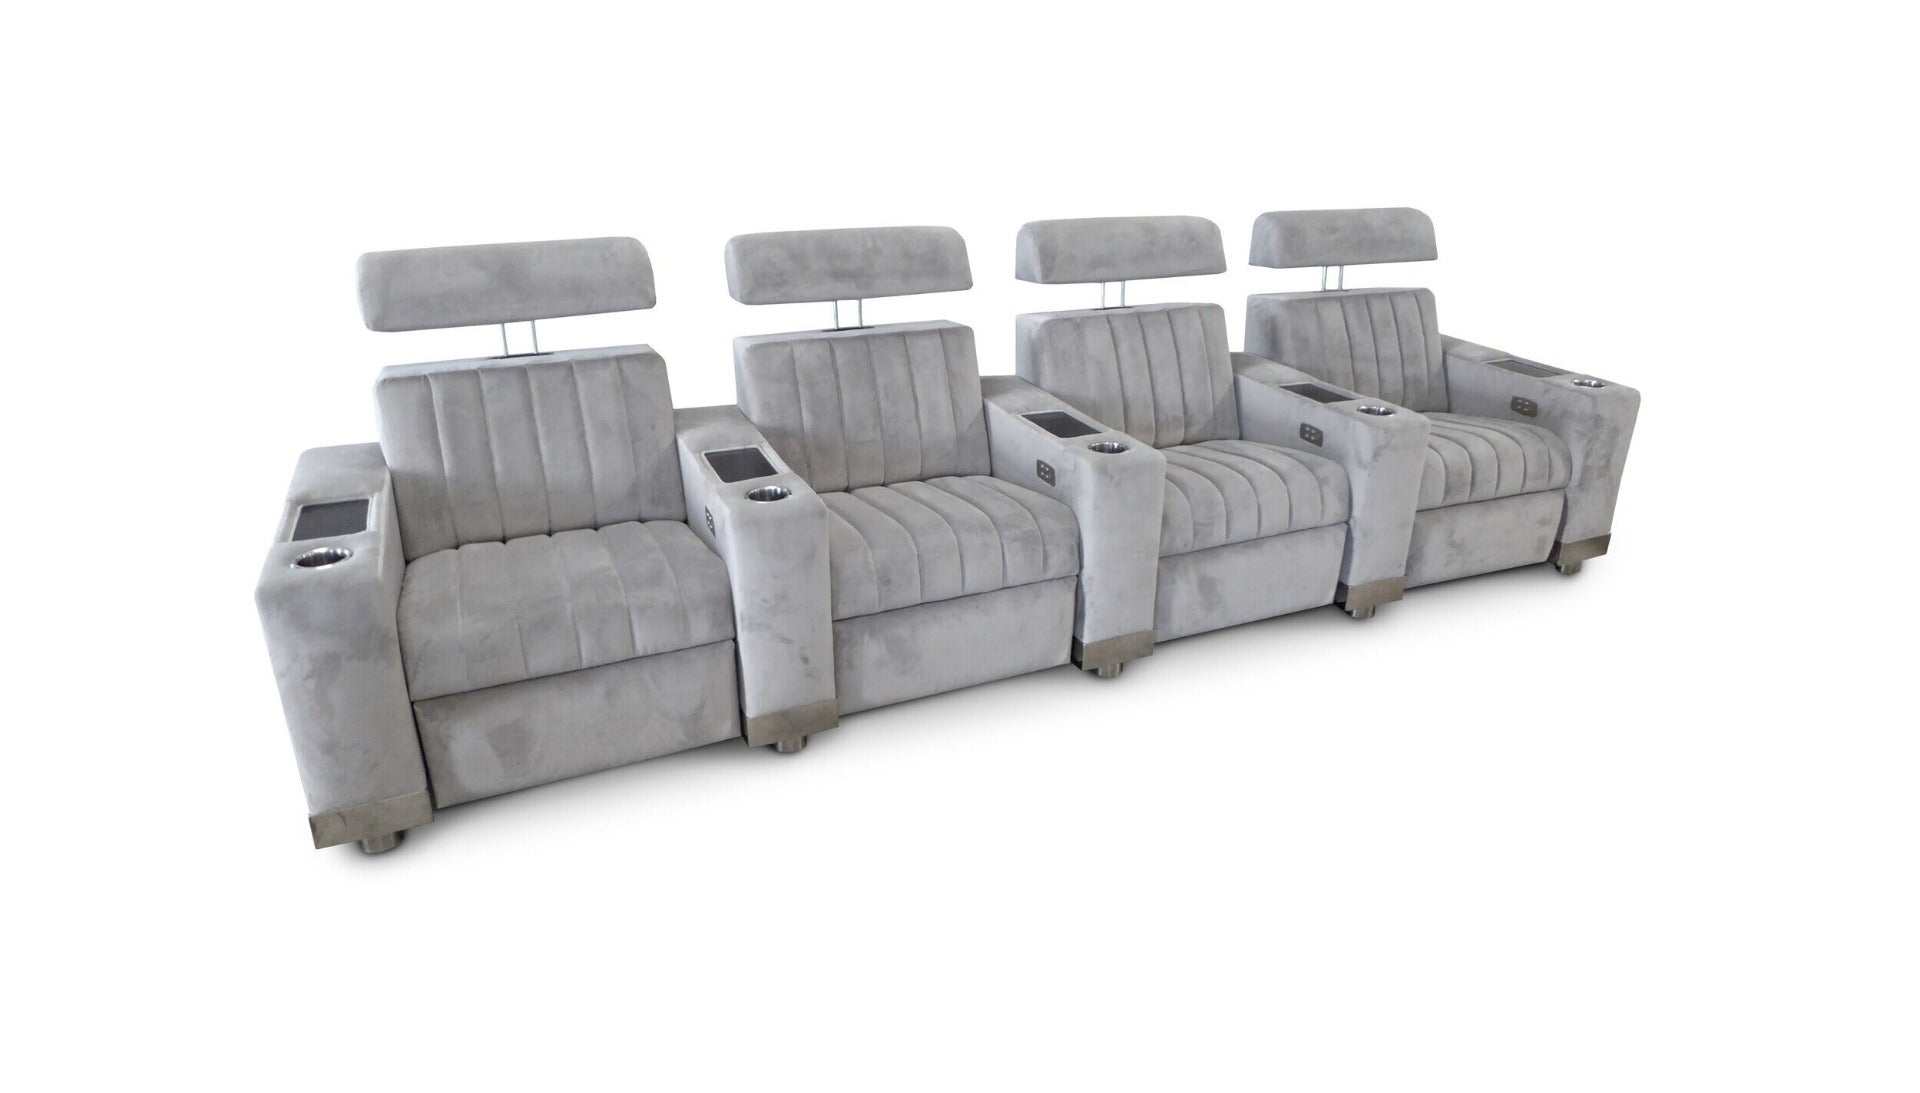 Fortress Seating AirFlo